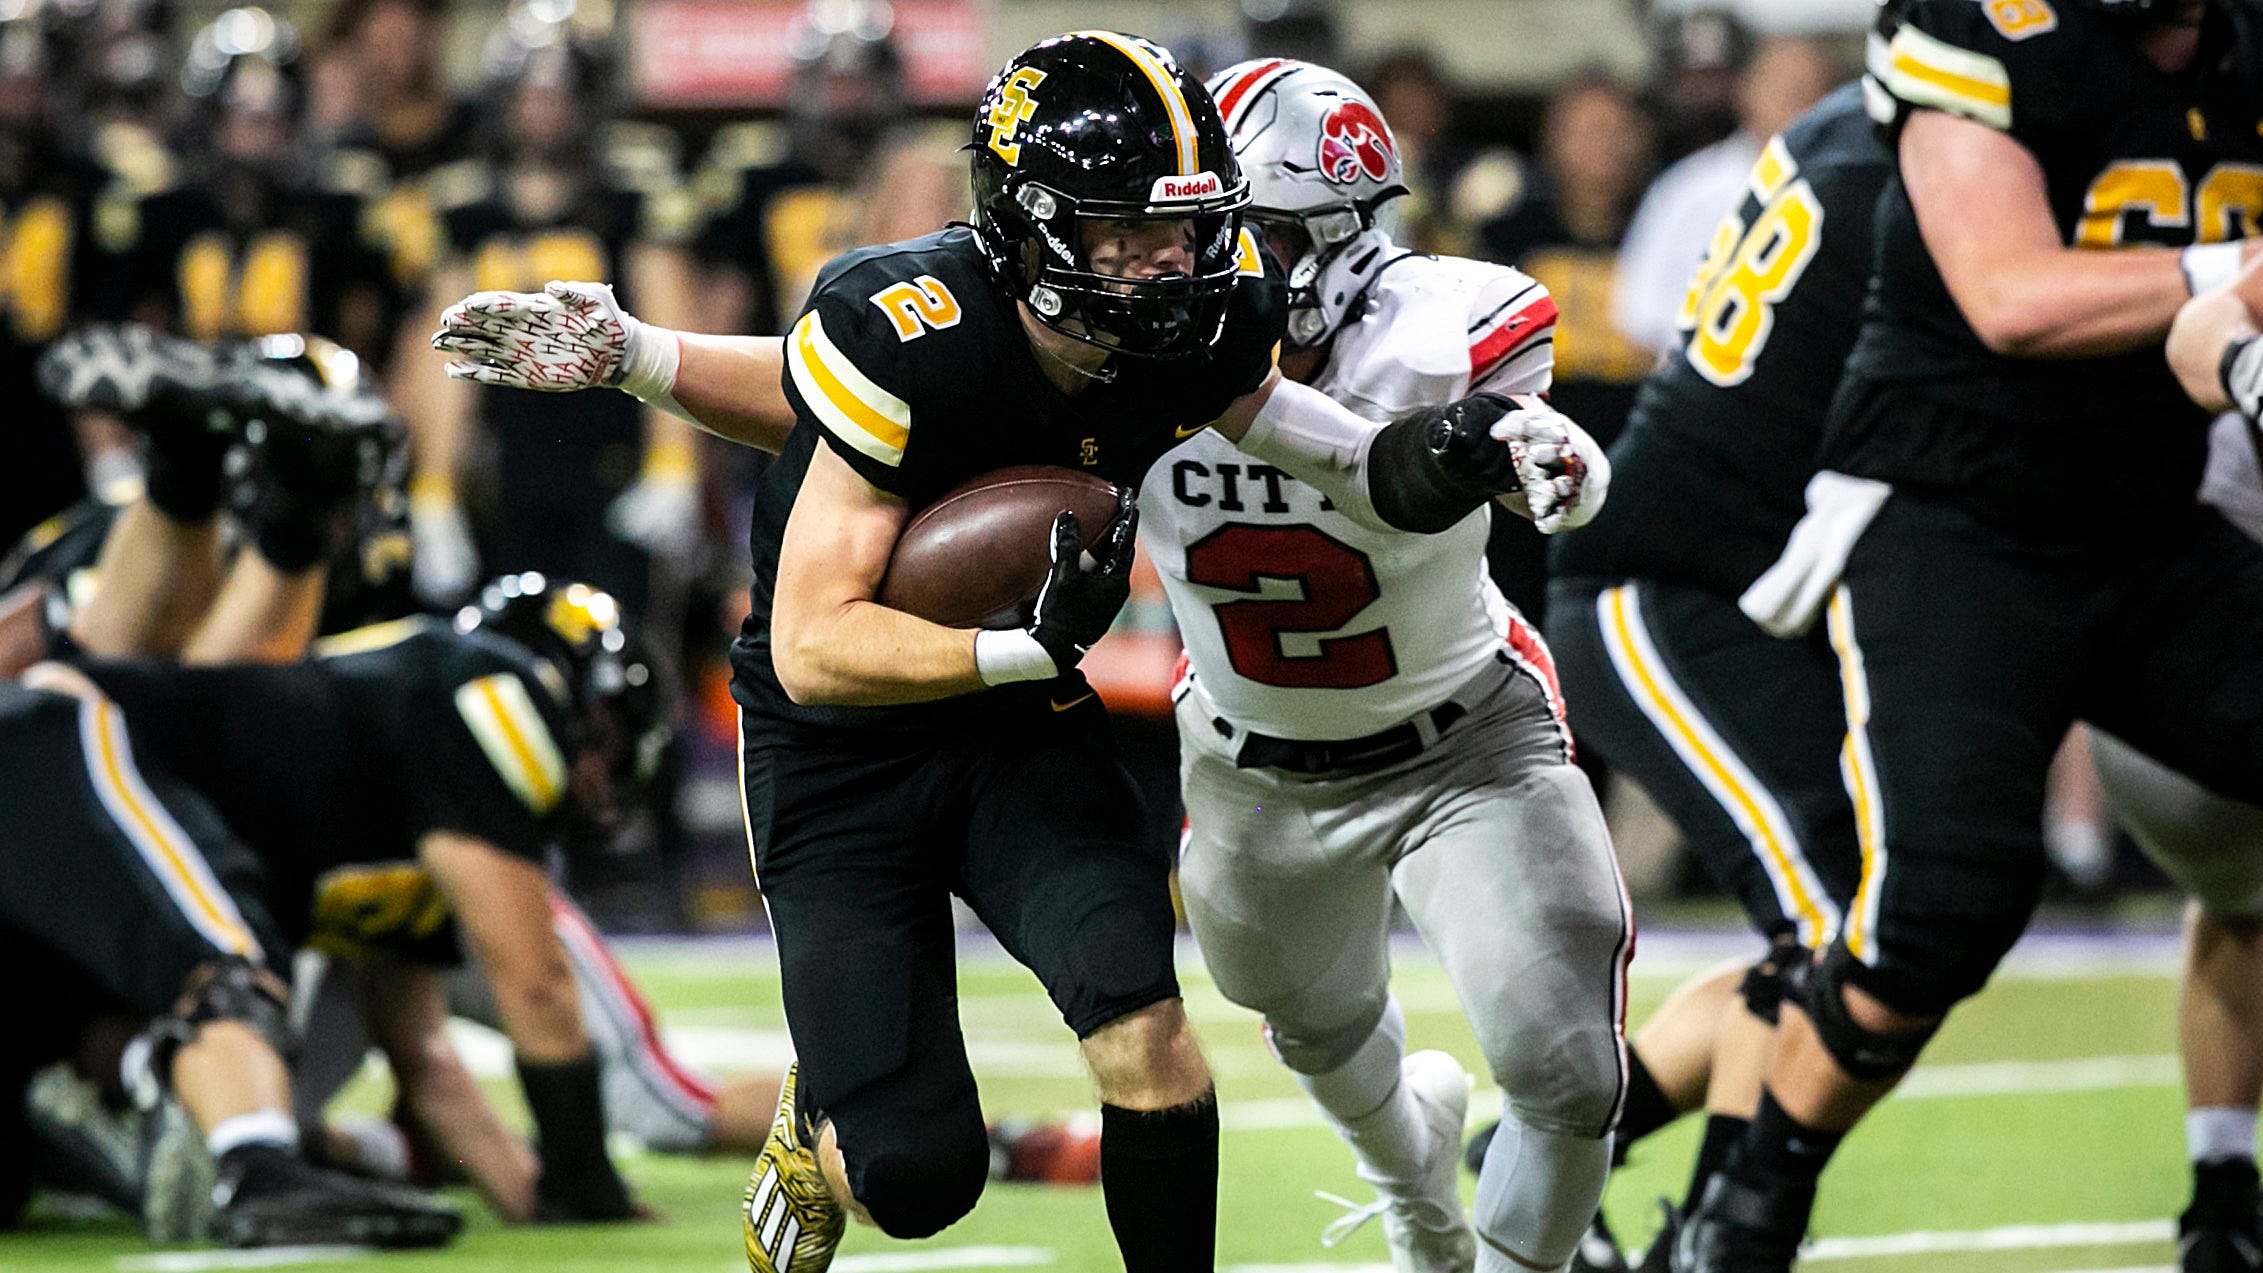 Iowa high school football playoff scores for semifinals at UNIDome